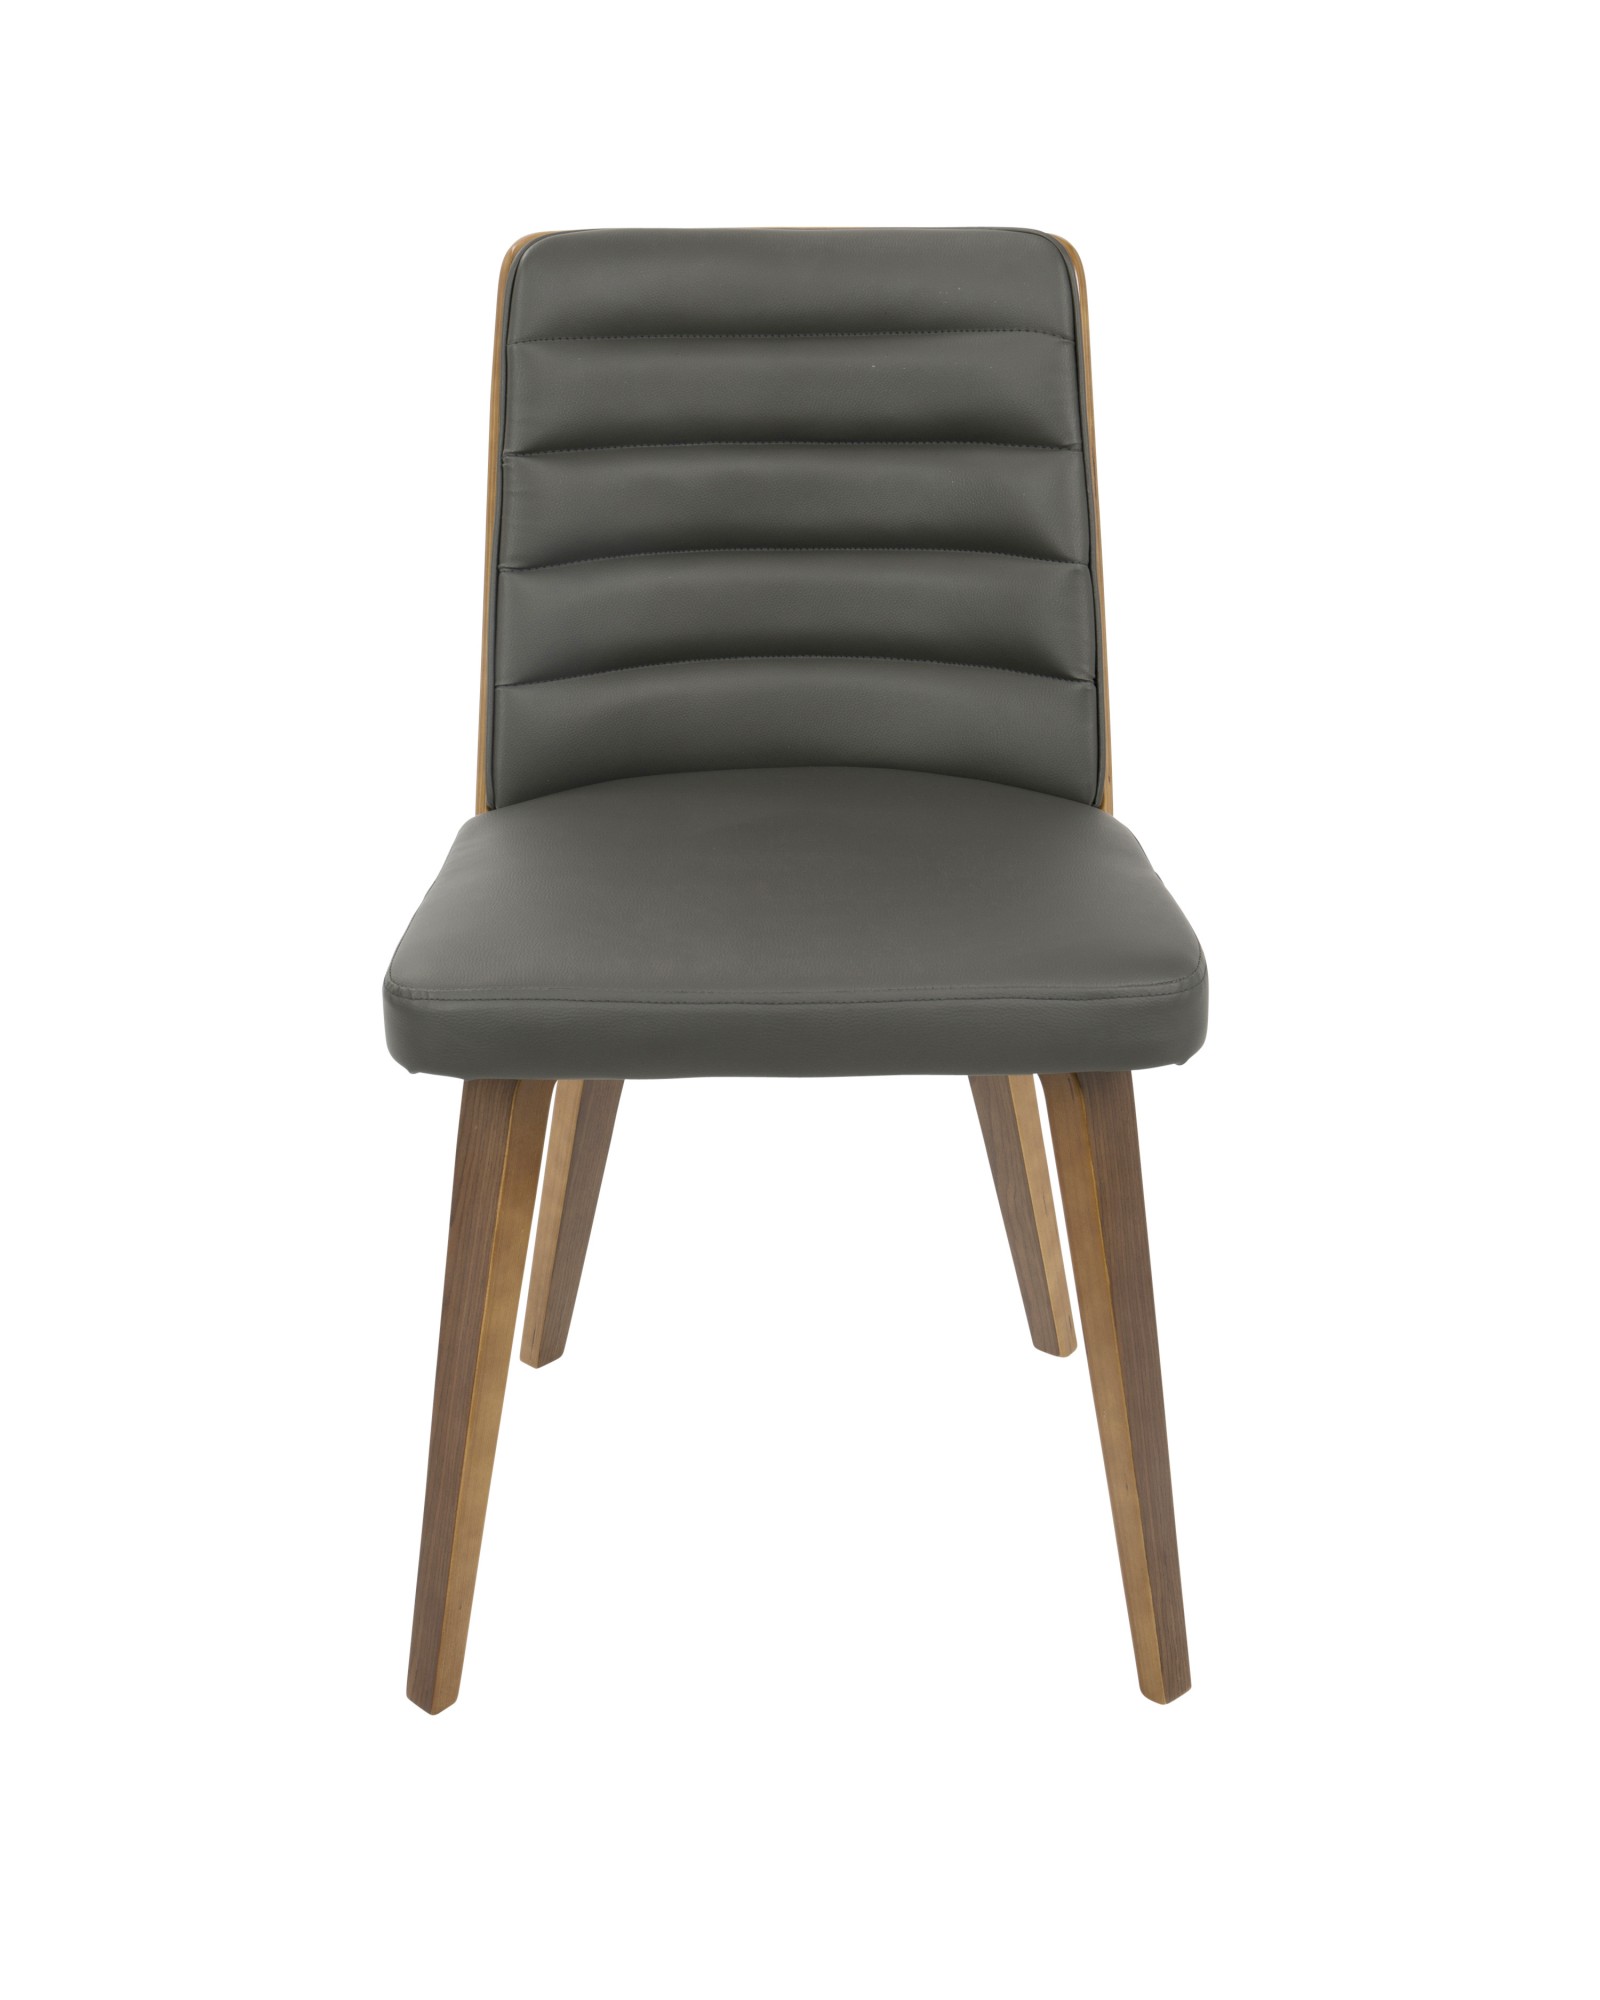 Francesca Mid-Century Modern Dining/Accent Chair in Walnut Wood and Grey Faux Leather